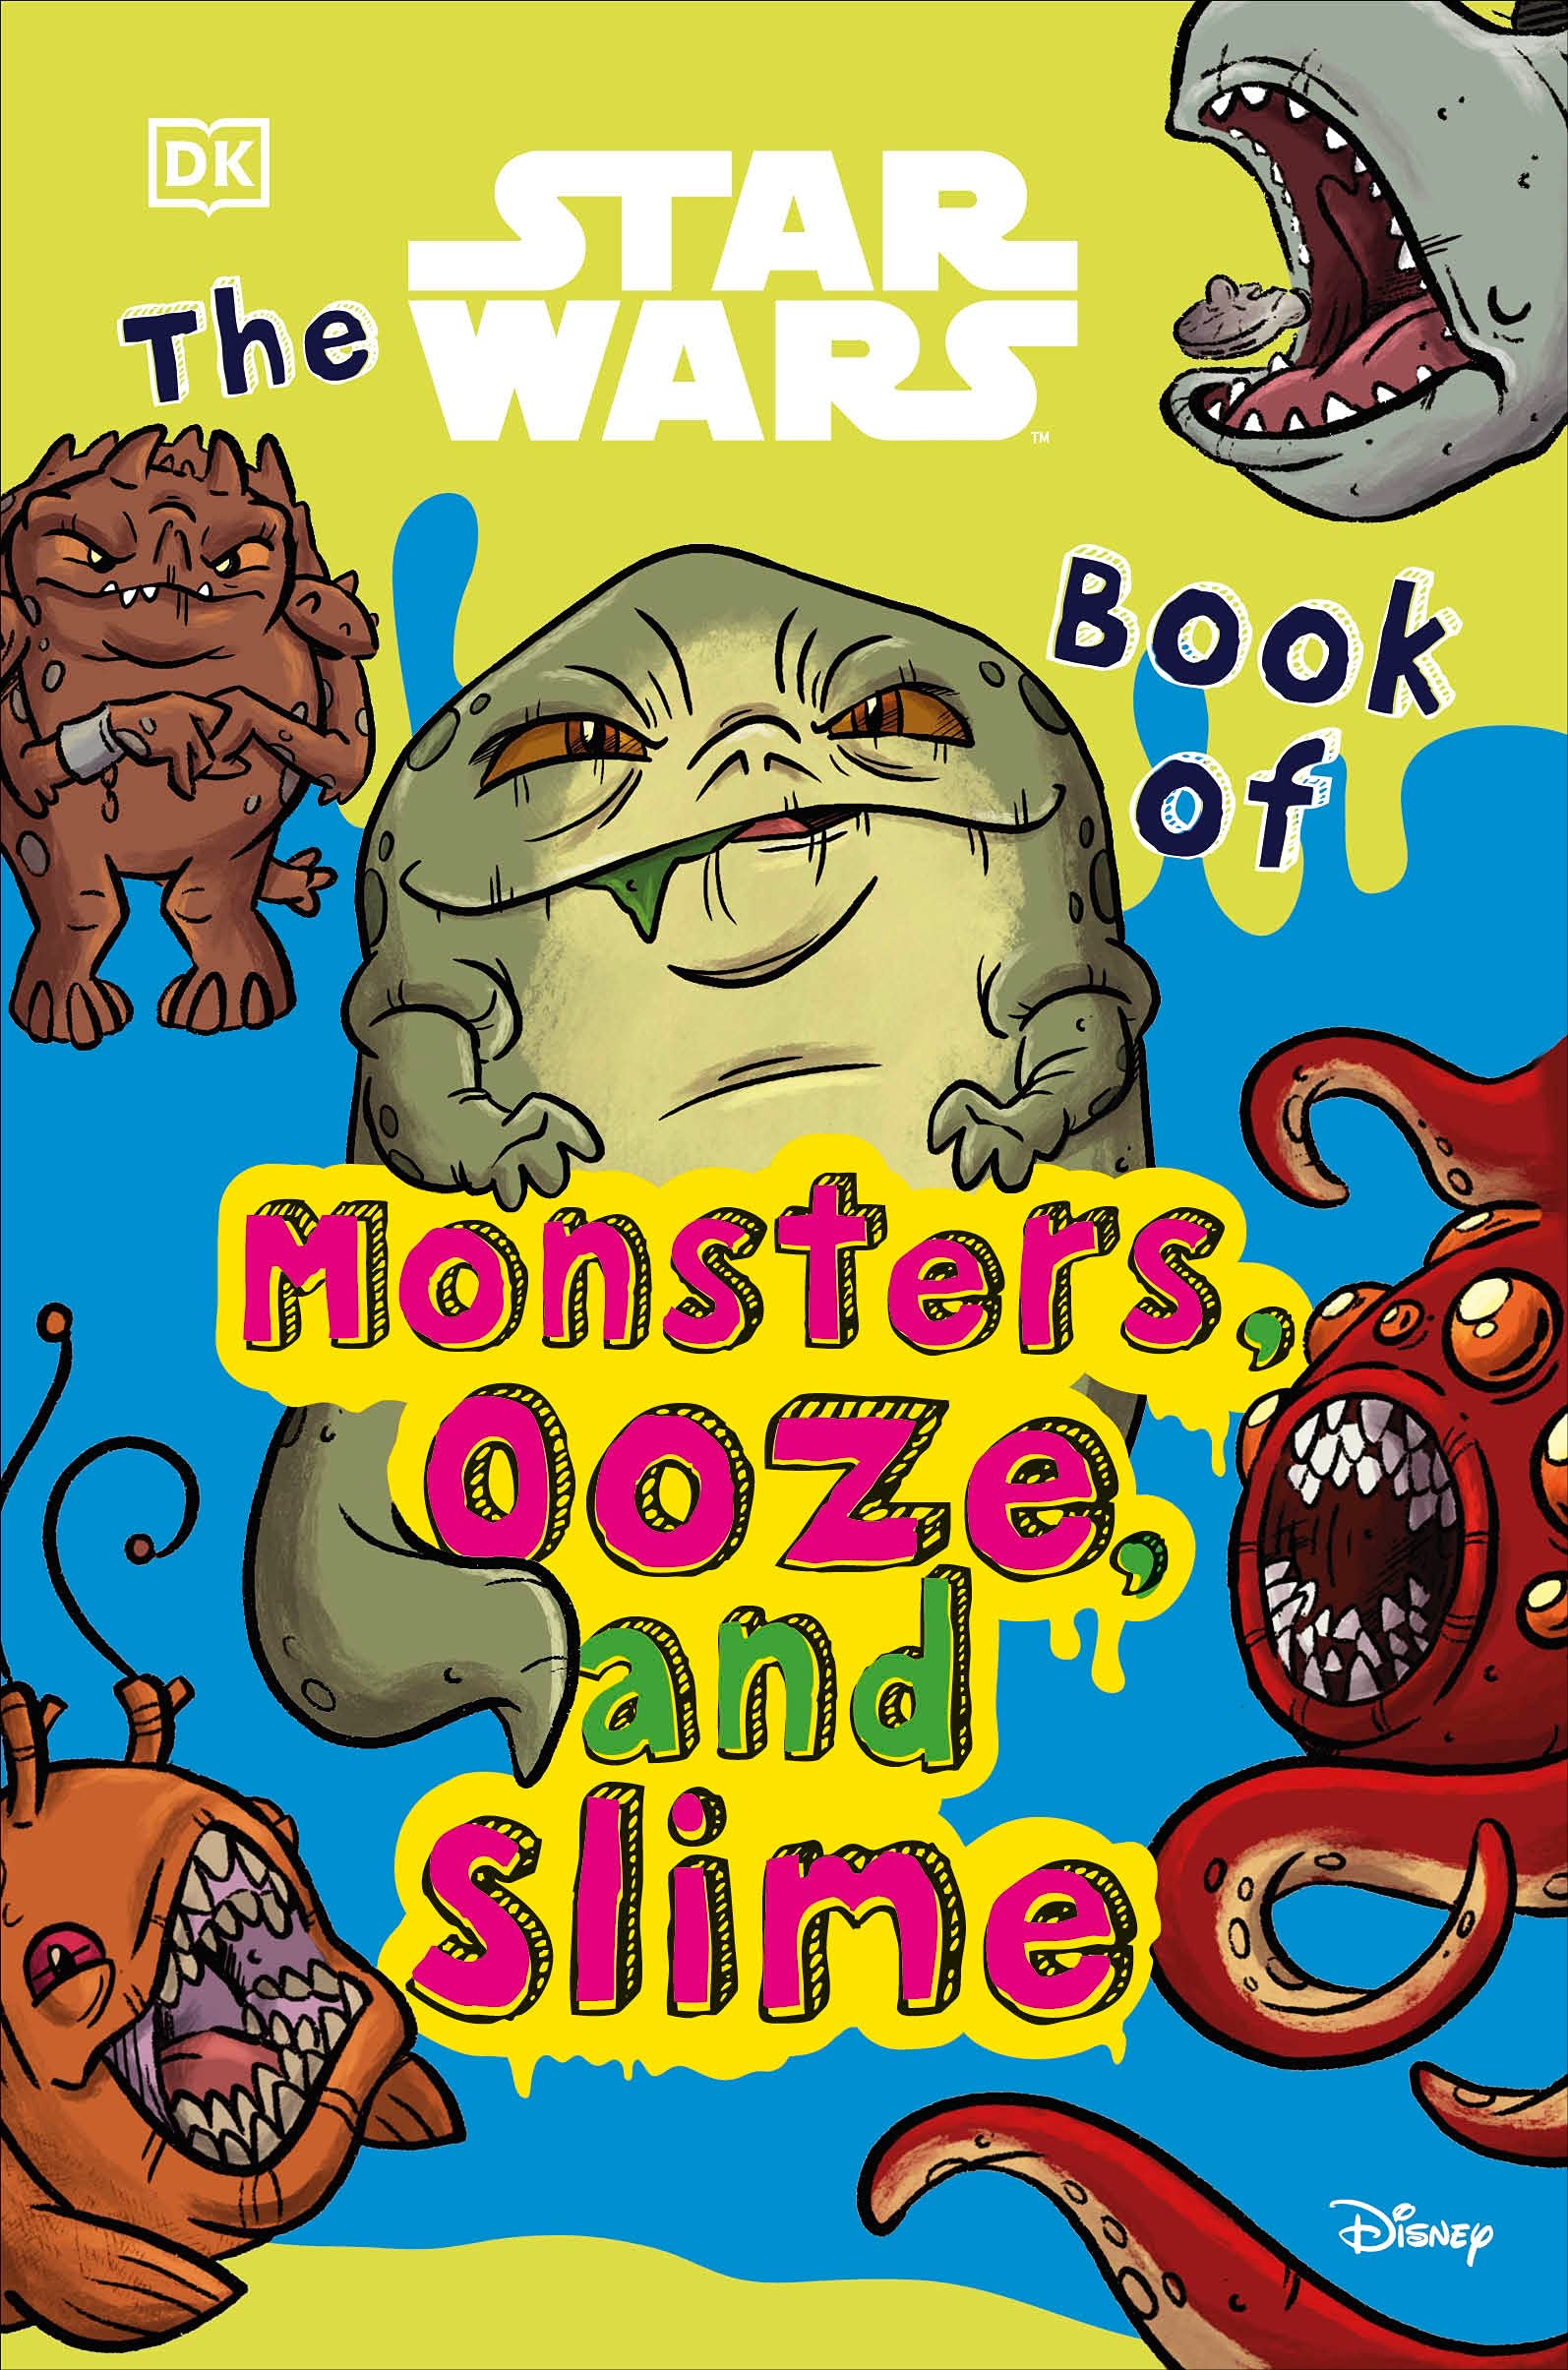 Star Wars Book of Monsters Ooze & Slime Soft Cover